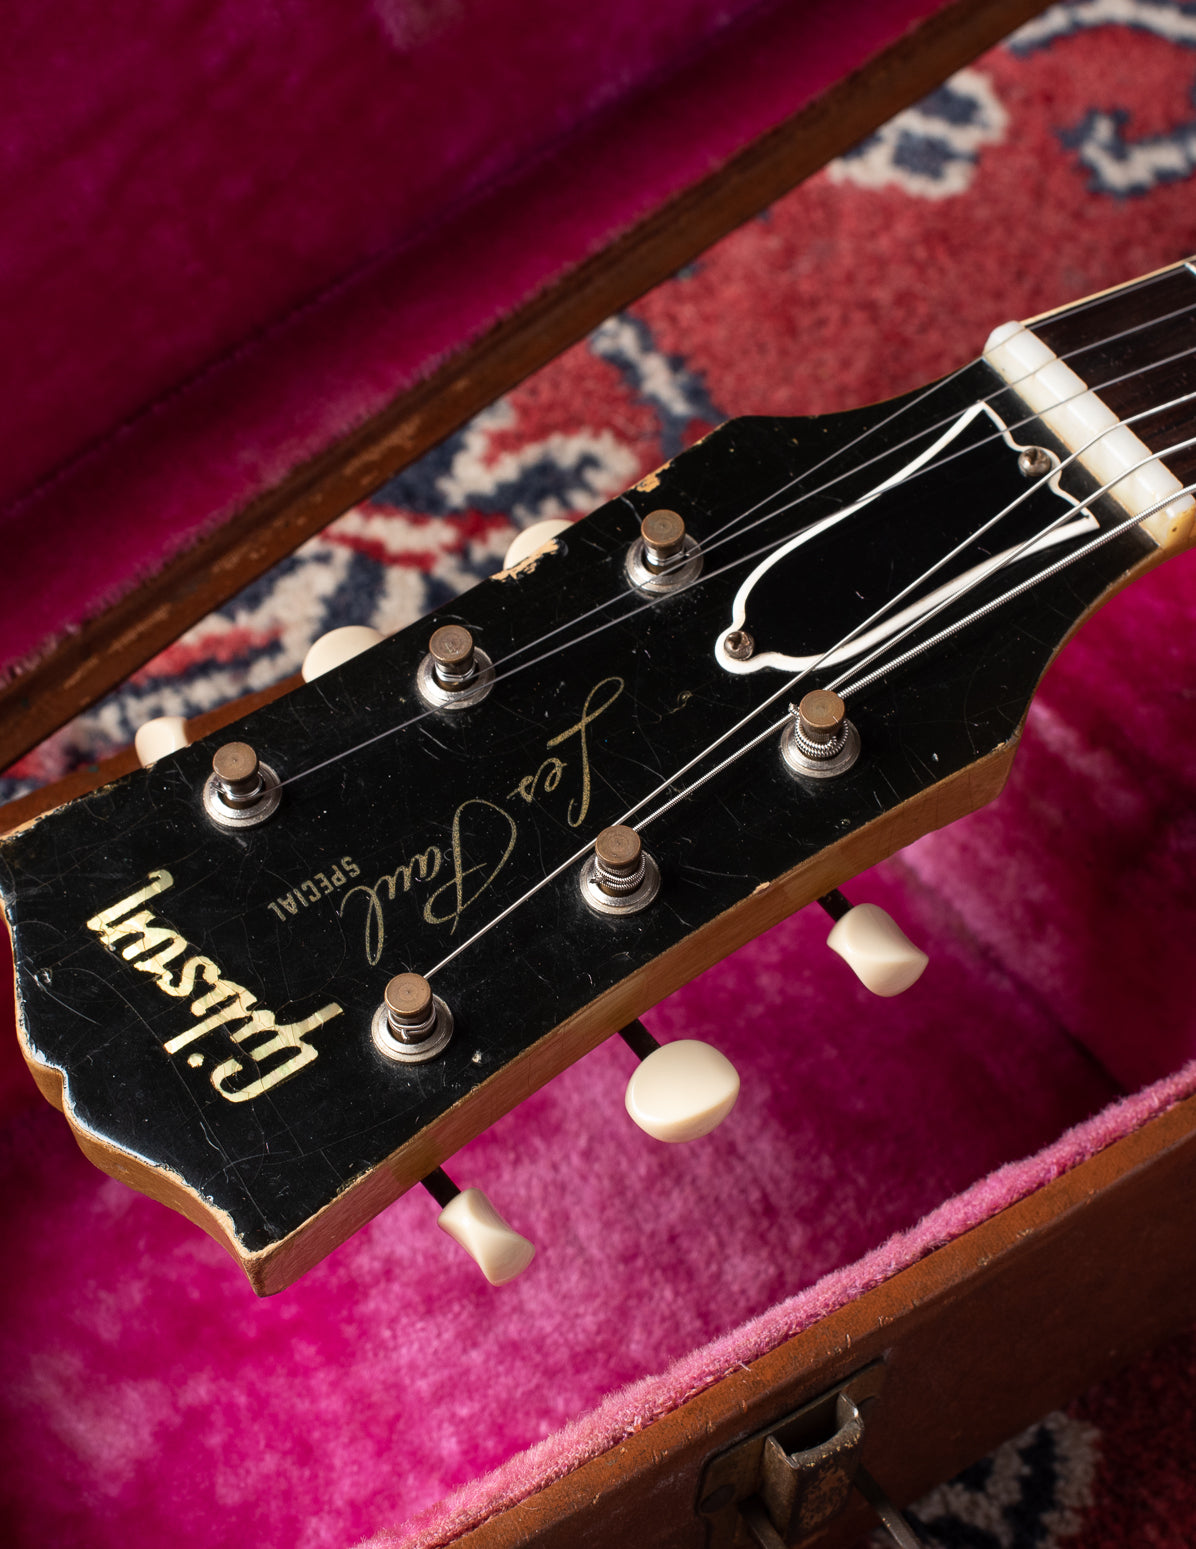 Gibson Les Paul 1950s headstock and neck